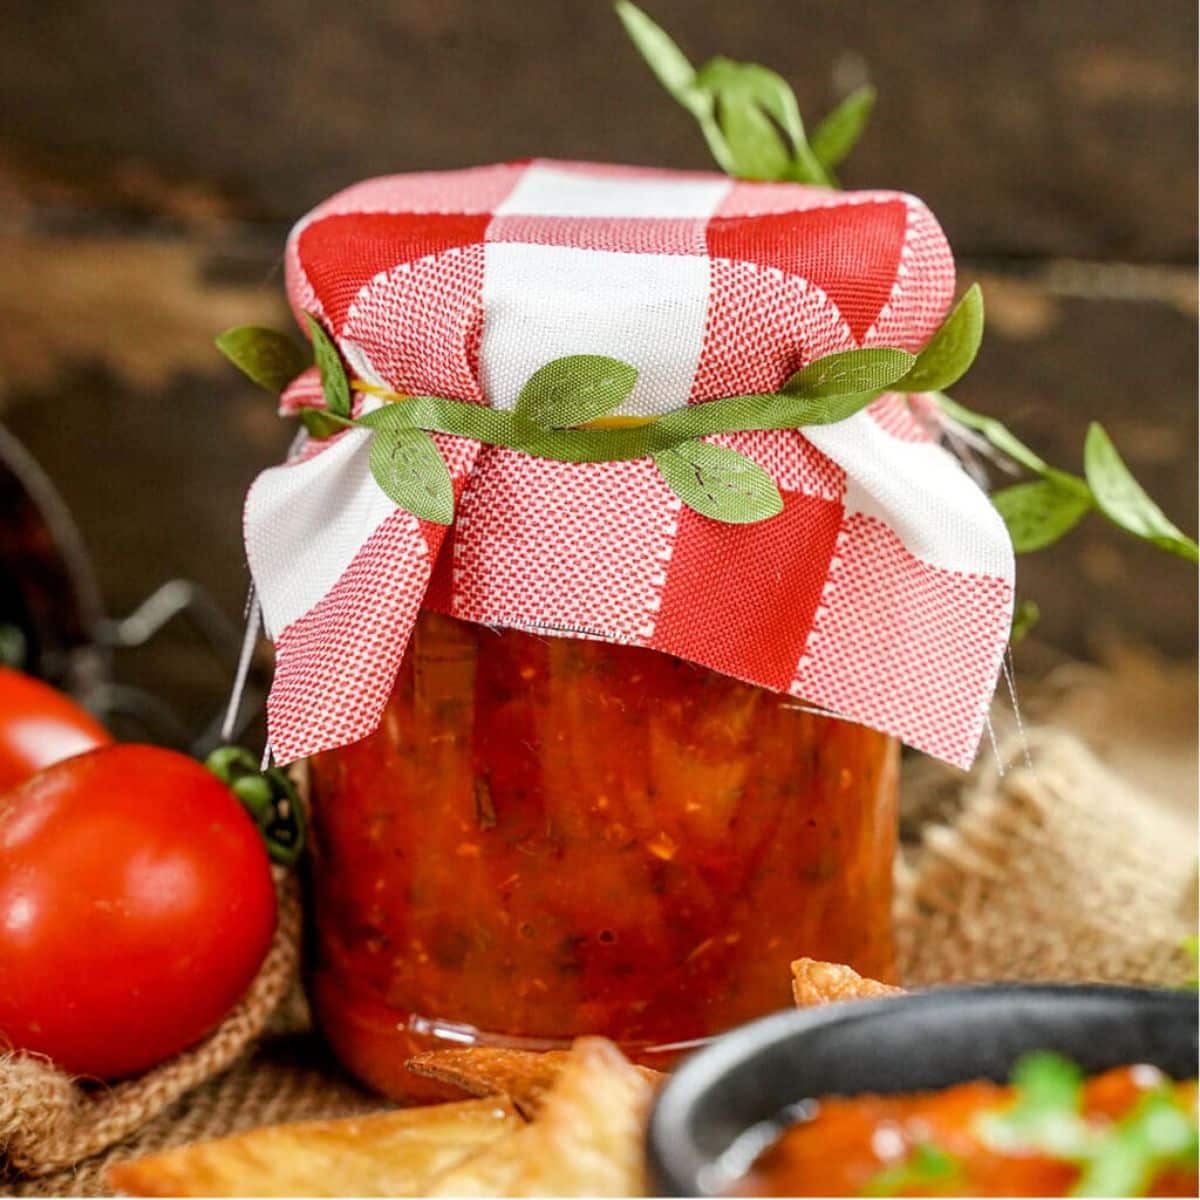 Delicious homemade canned salsa in a glass jar.